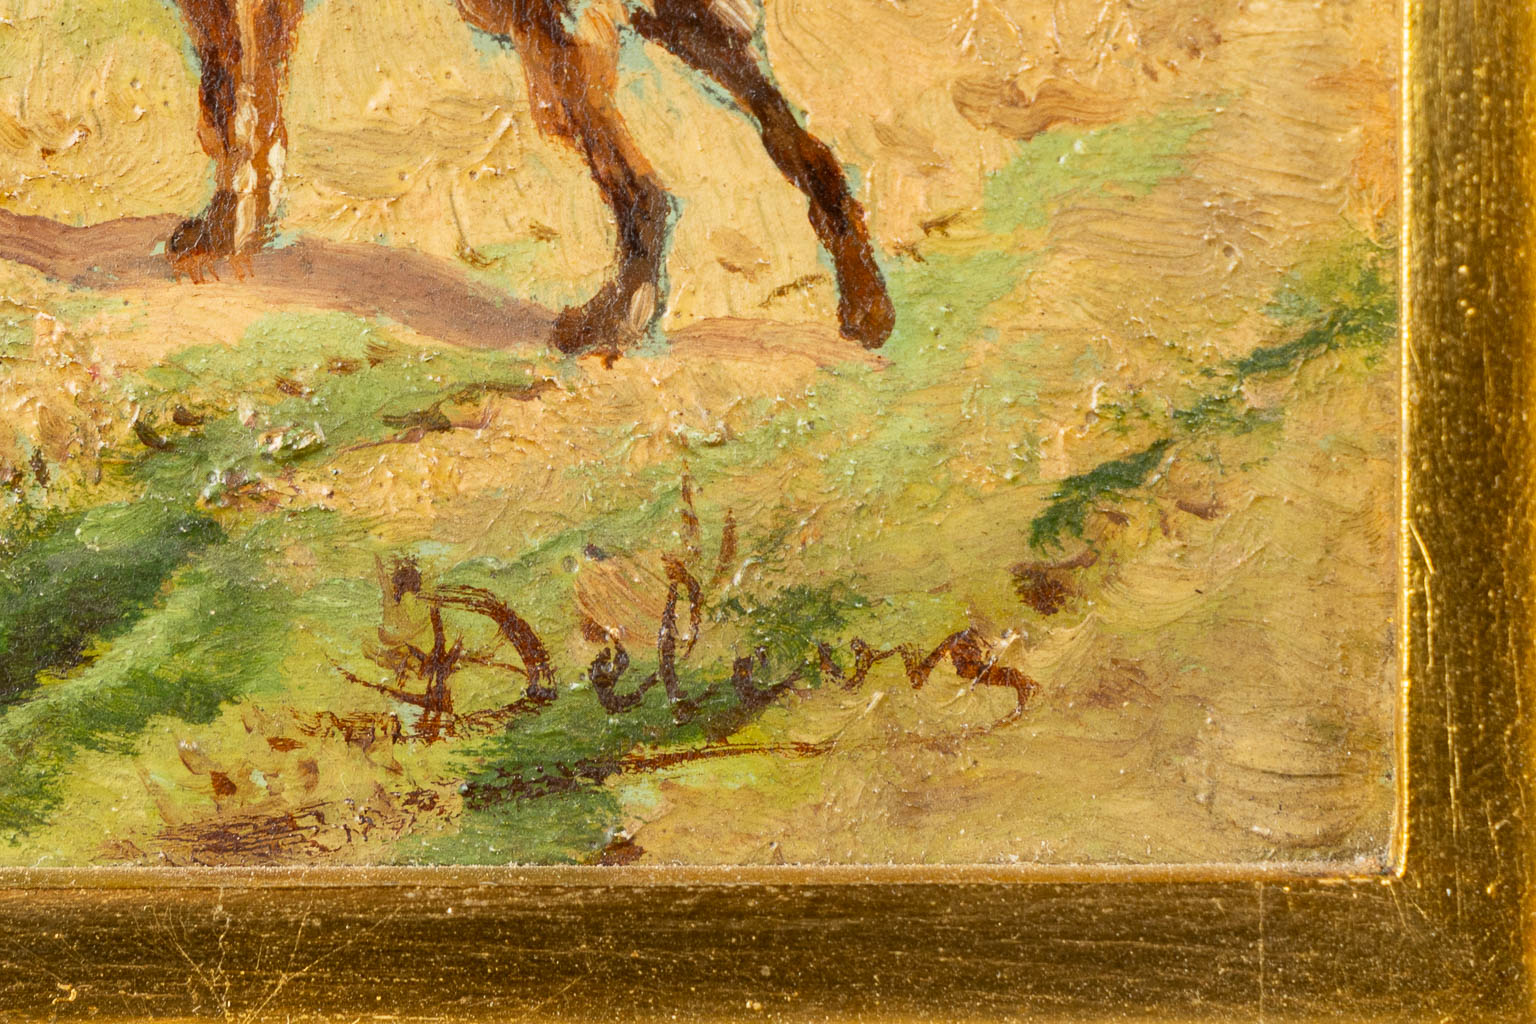 Délion (XIX) 'The Horse-drawn carriage' oil on panel. (W:26 x H:23 cm) - Image 5 of 6